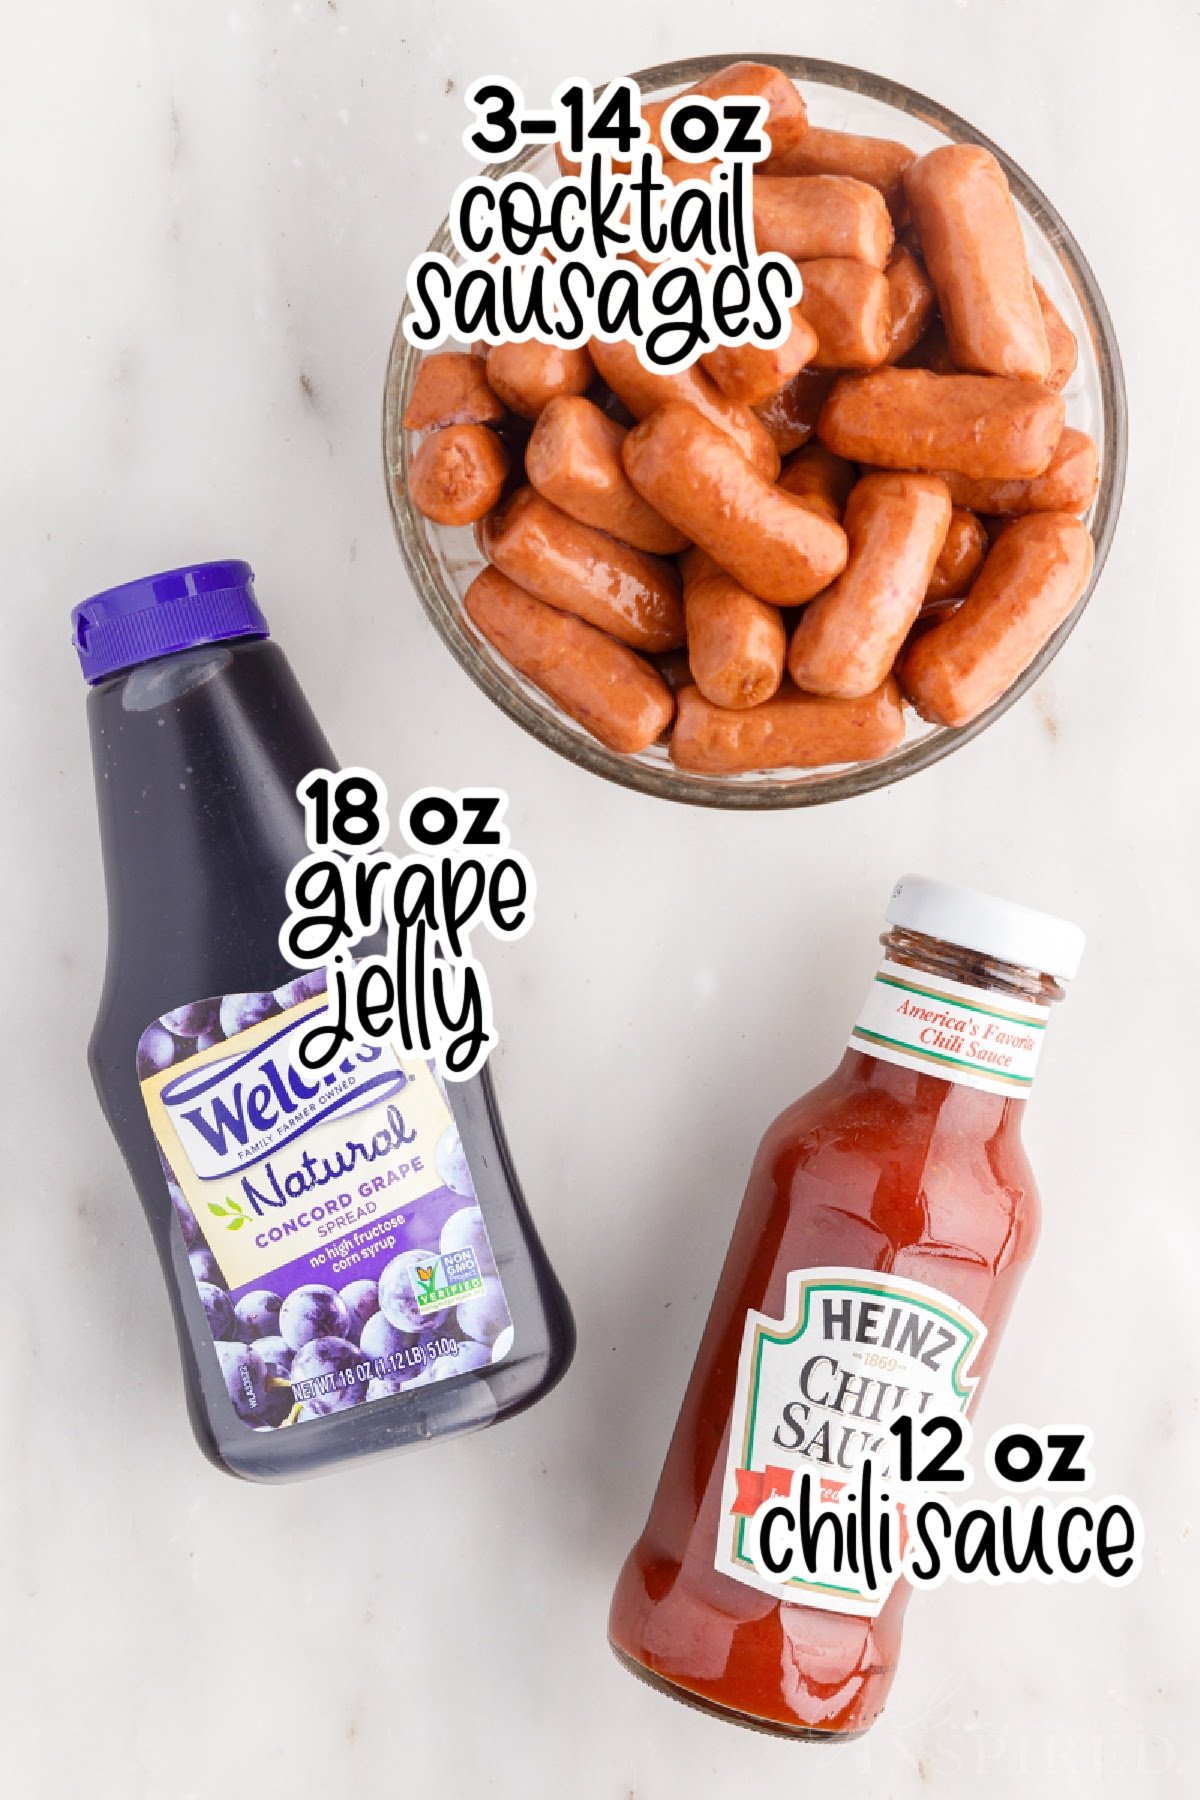 Ingredients labeled to make little smokies in grape jelly in the slow cooker.